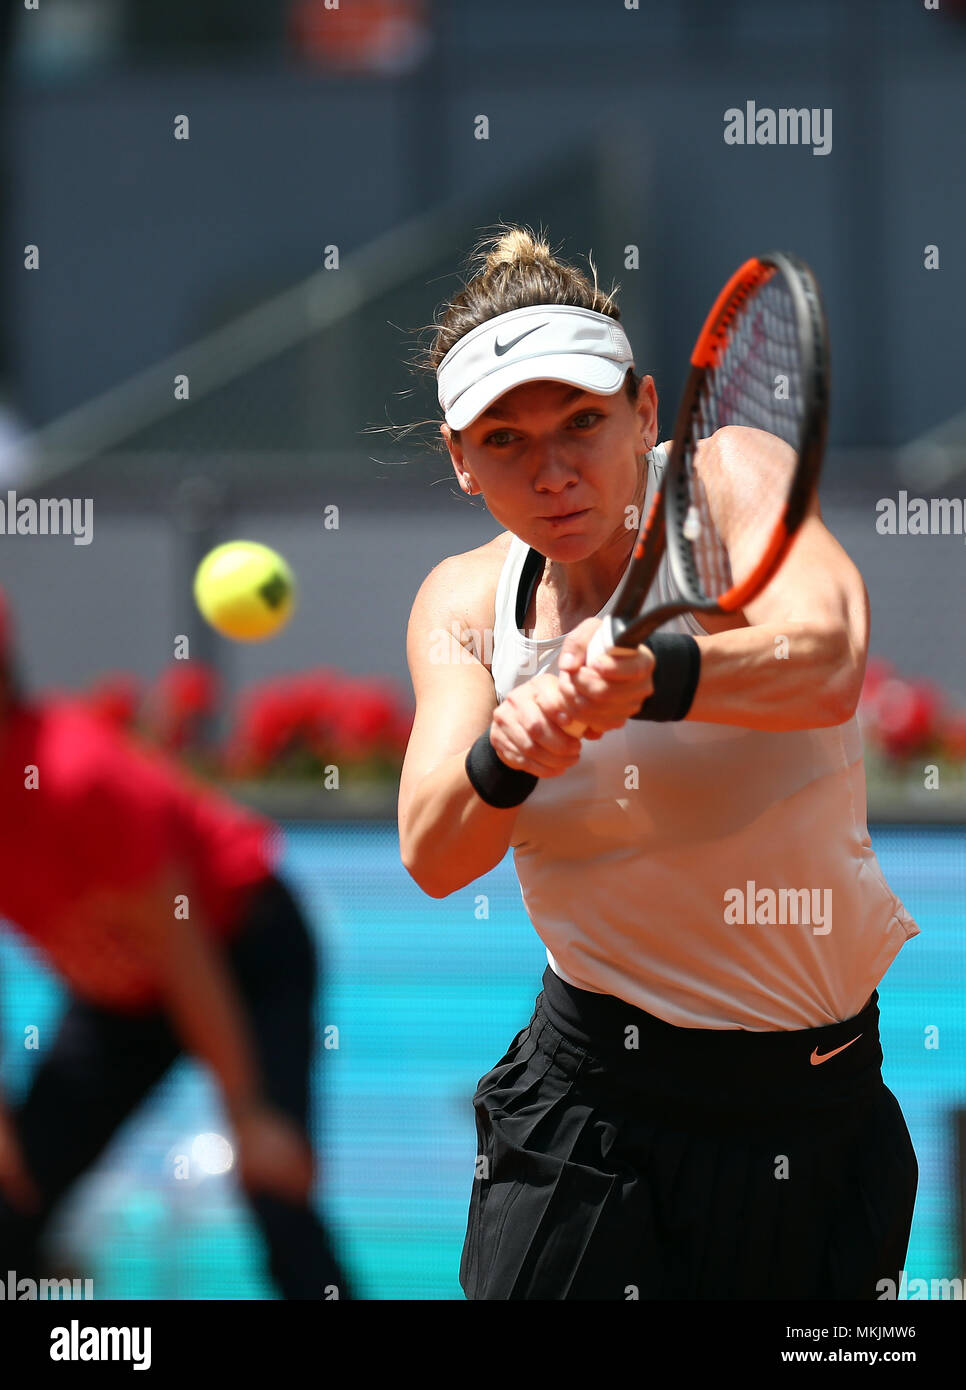 Madrid, Spain. 8th May, 2018. Simona Halep of Romania plays a backhand to Elise Mertens of Belgium in the 2nd Round match during day four of the Mutua Madrid Open tennis tournament at the Caja Magica. Credit: Manu Reino/SOPA Images/ZUMA Wire/Alamy Live News Stock Photo